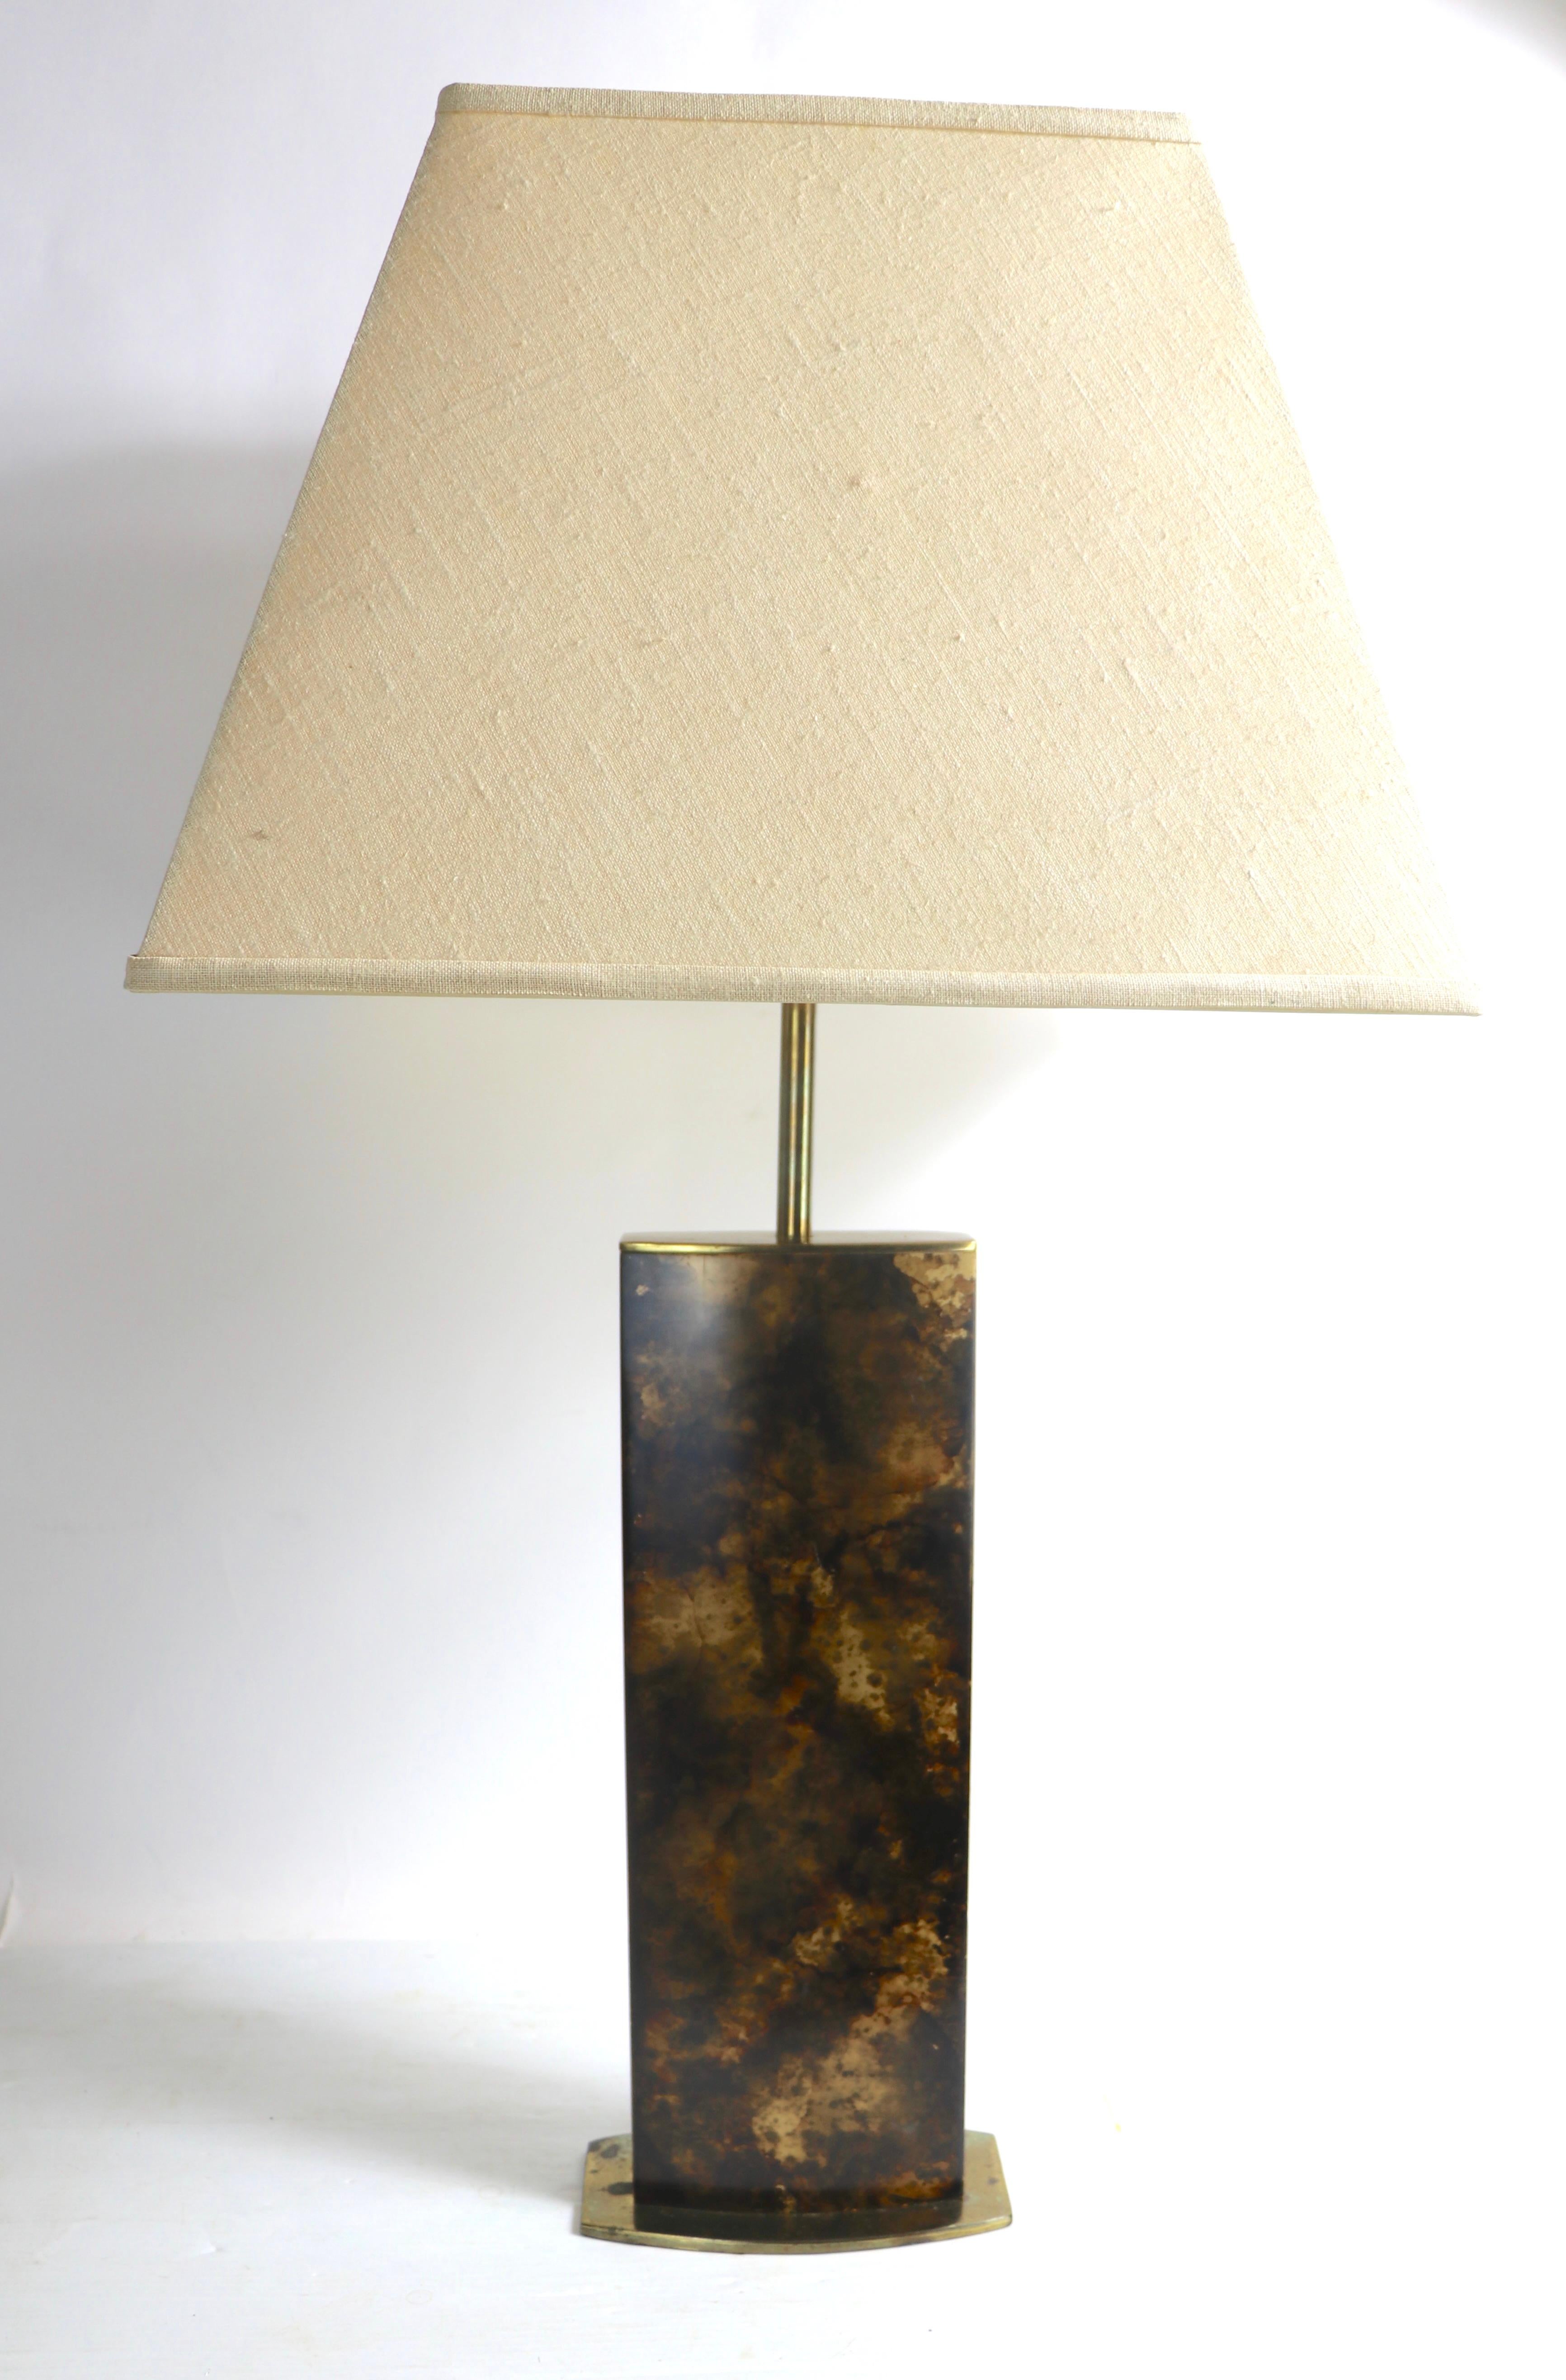 Metal Faux Tortoise Shell Finish Table Lamp by Mutual Sunset Lamp Manufacturing Co. For Sale